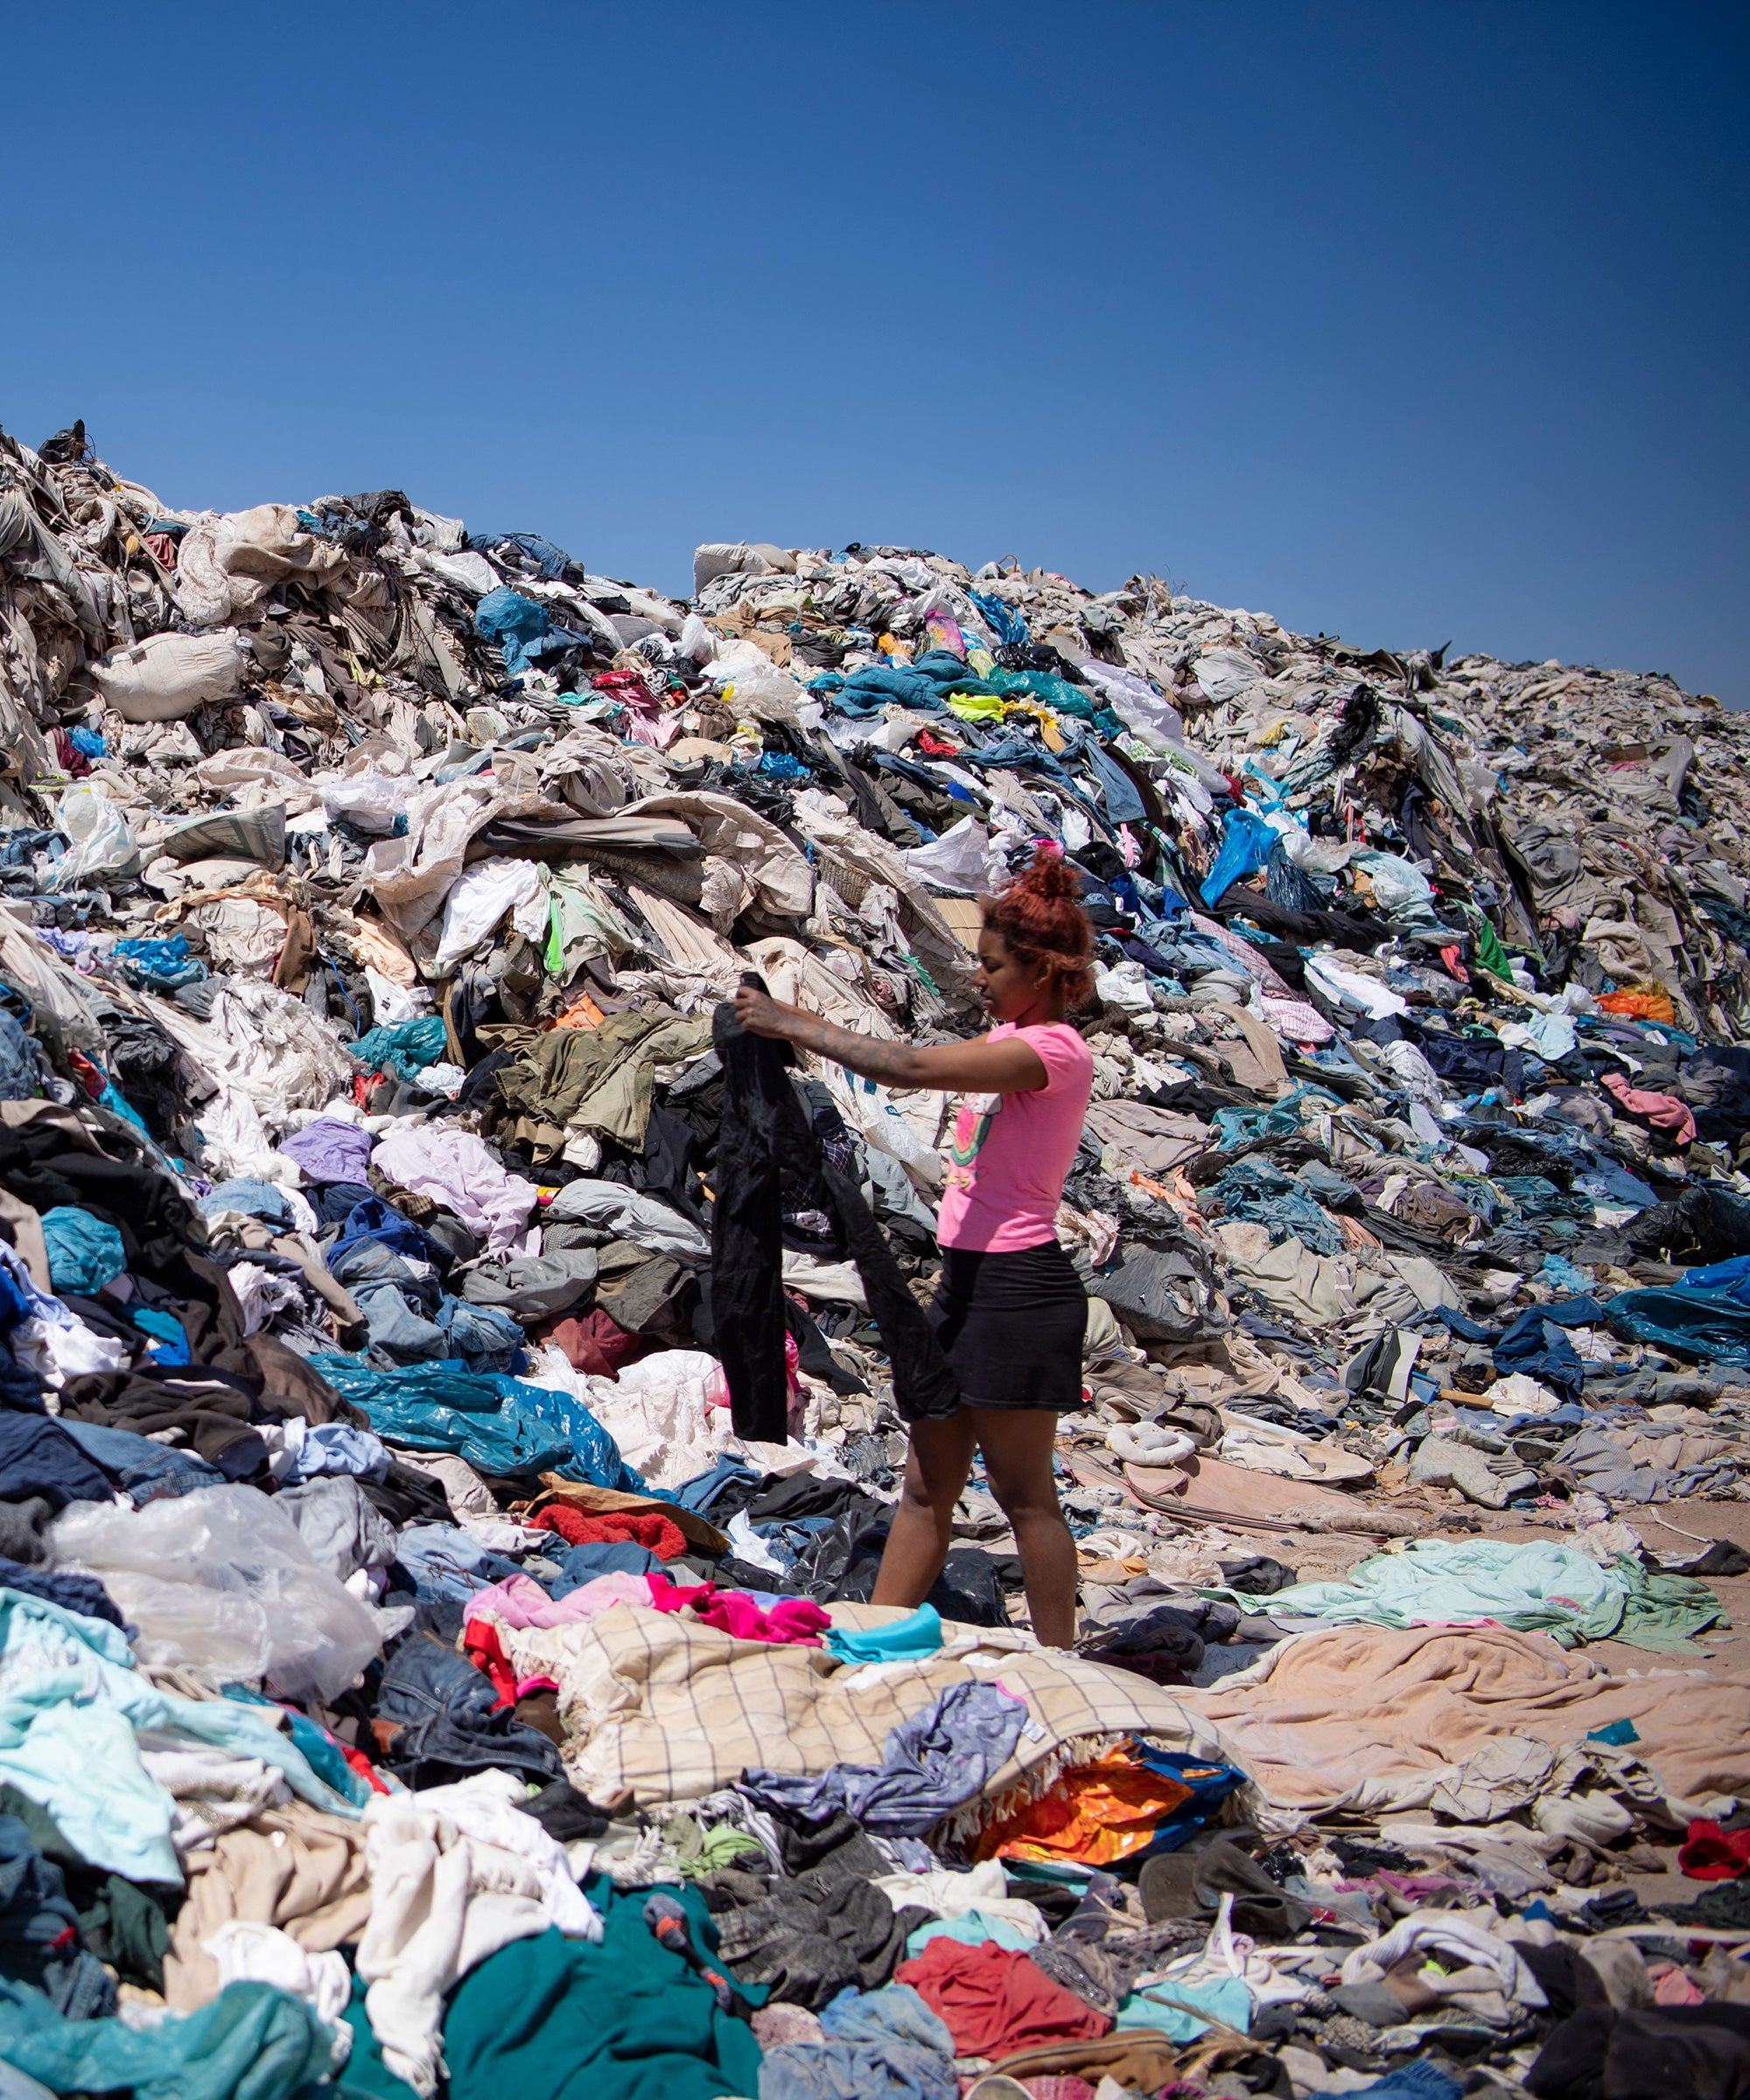 Our Clothes Are Polluting the Environment. Here's a Solution.